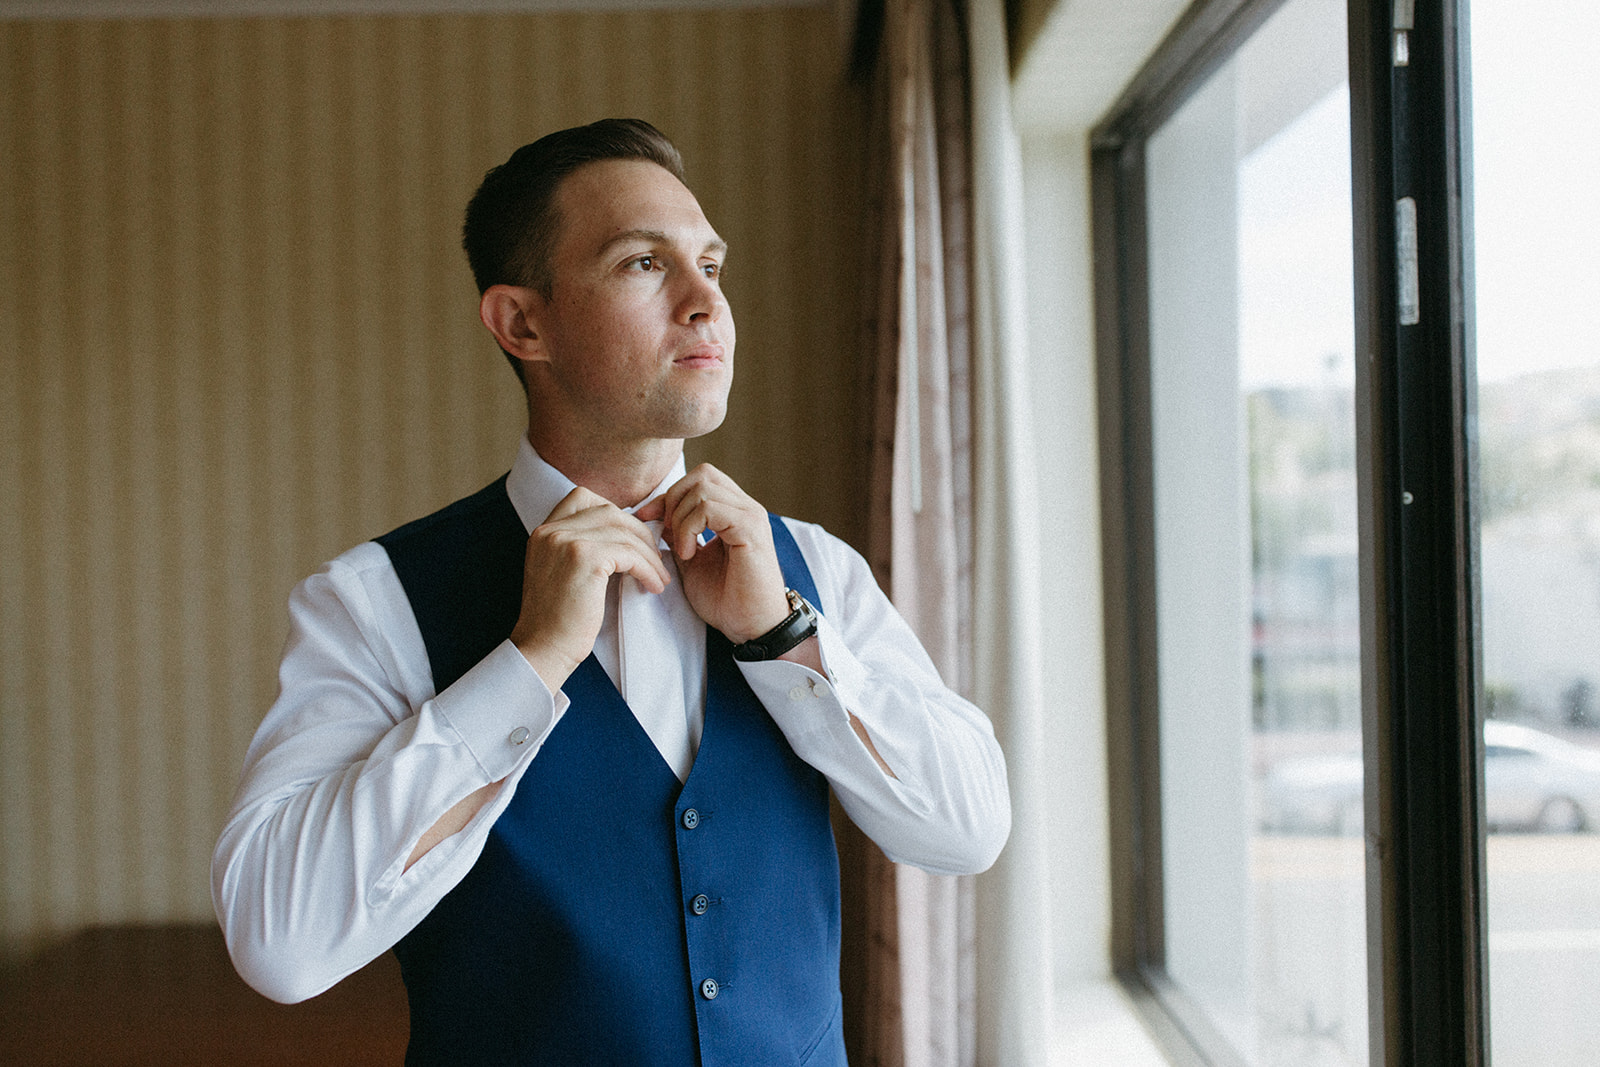 groom in blue vest and white shirt with white tie gets ready for wedding day